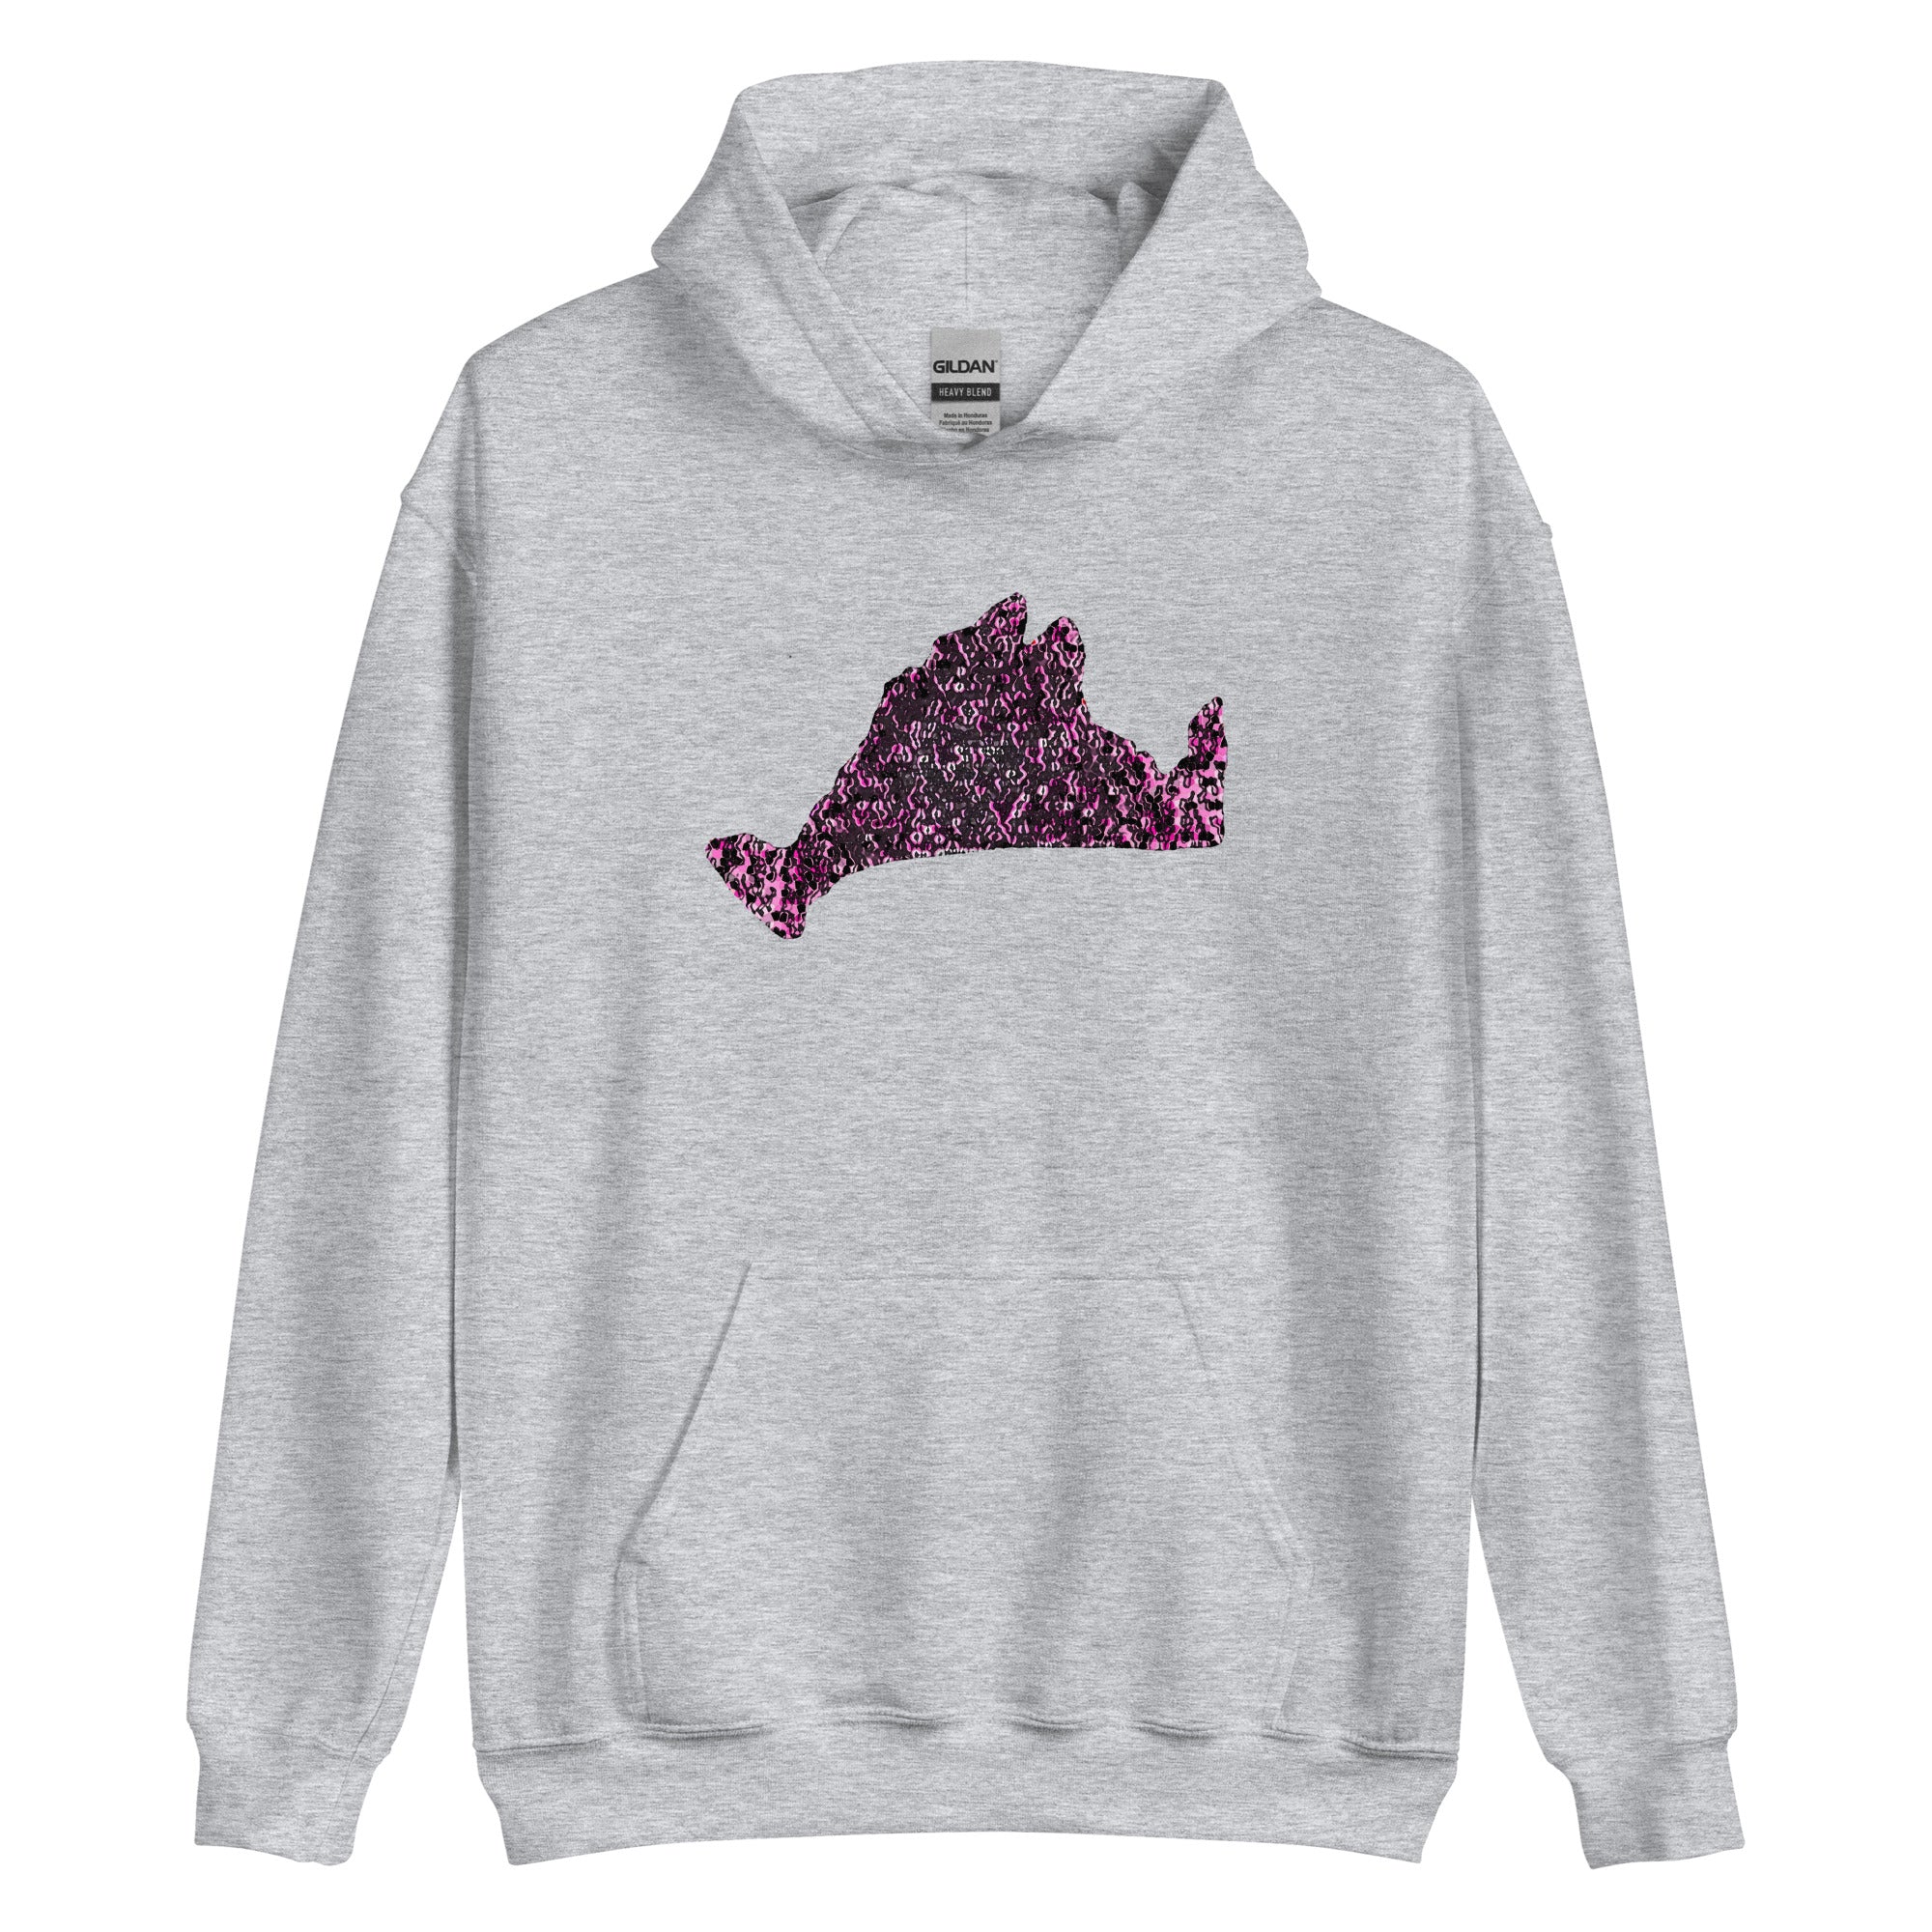 Limited Edition Hoodie-Pink Noir